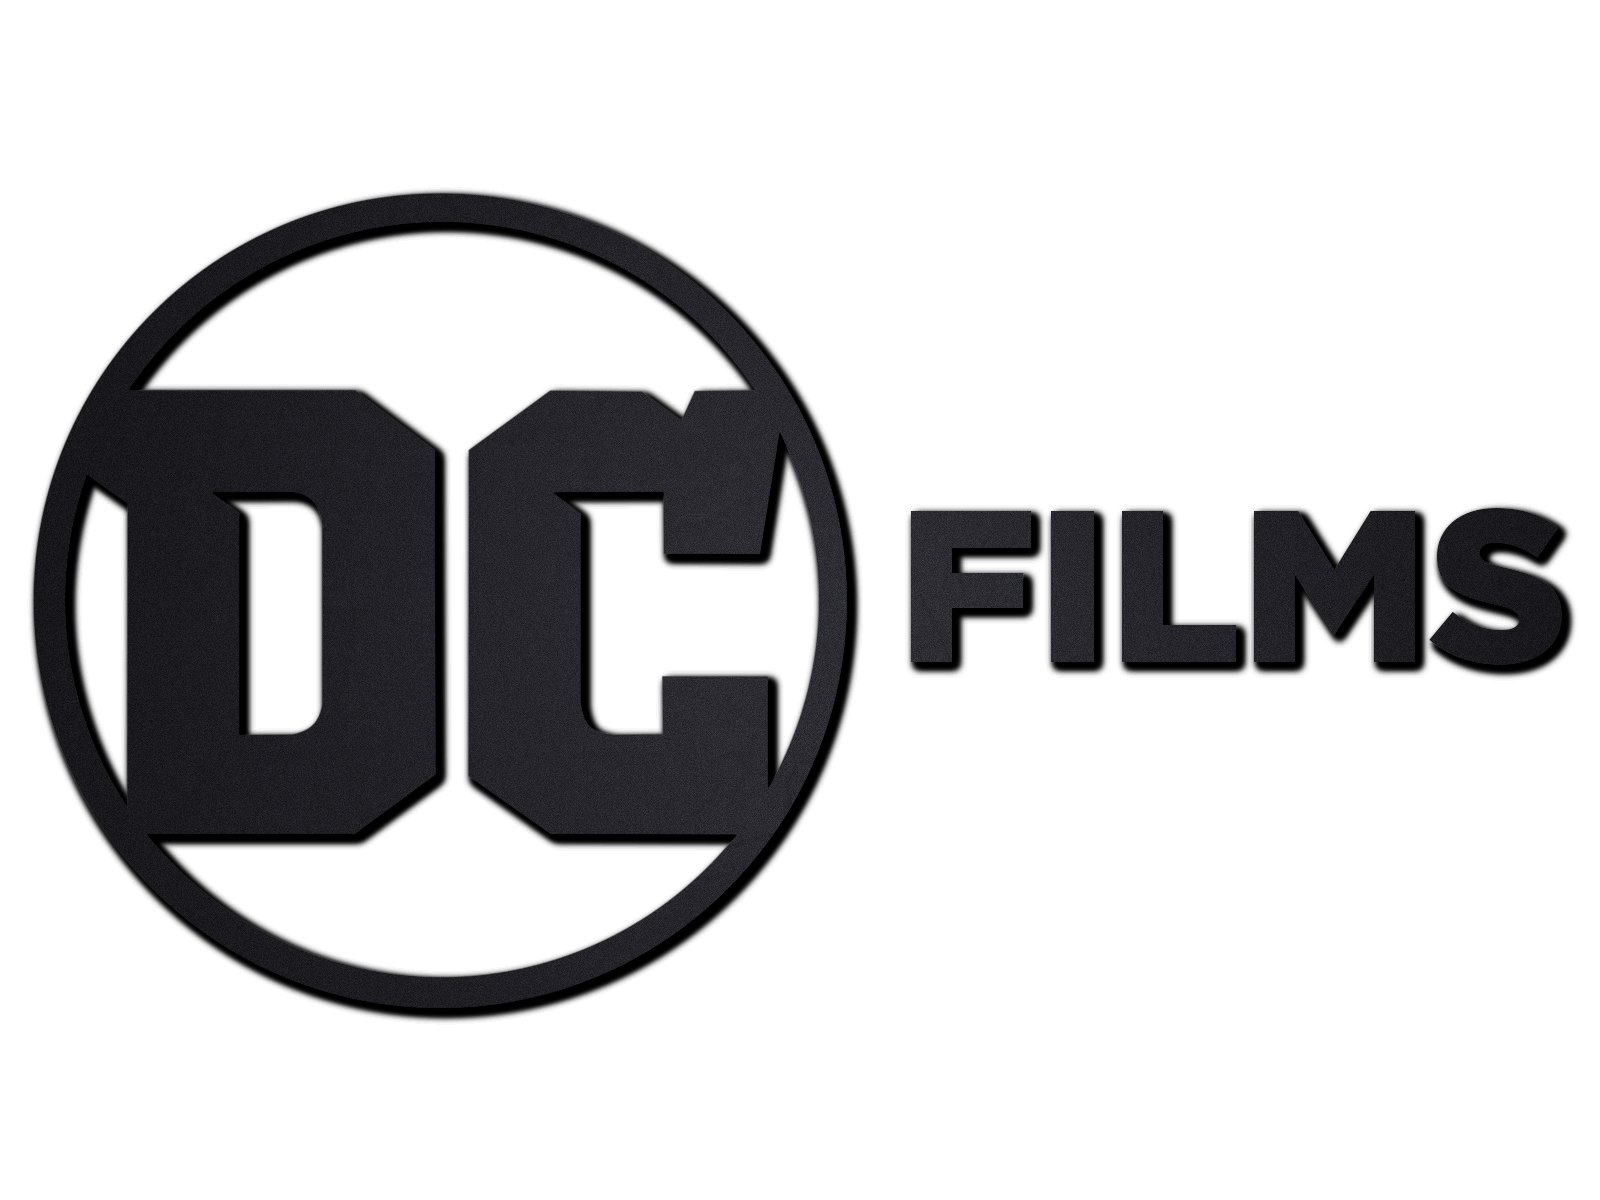 DC Movie Logo - RUMOR: Peter Jackson May Be Considering A DC Movie! – The Comics Bolt